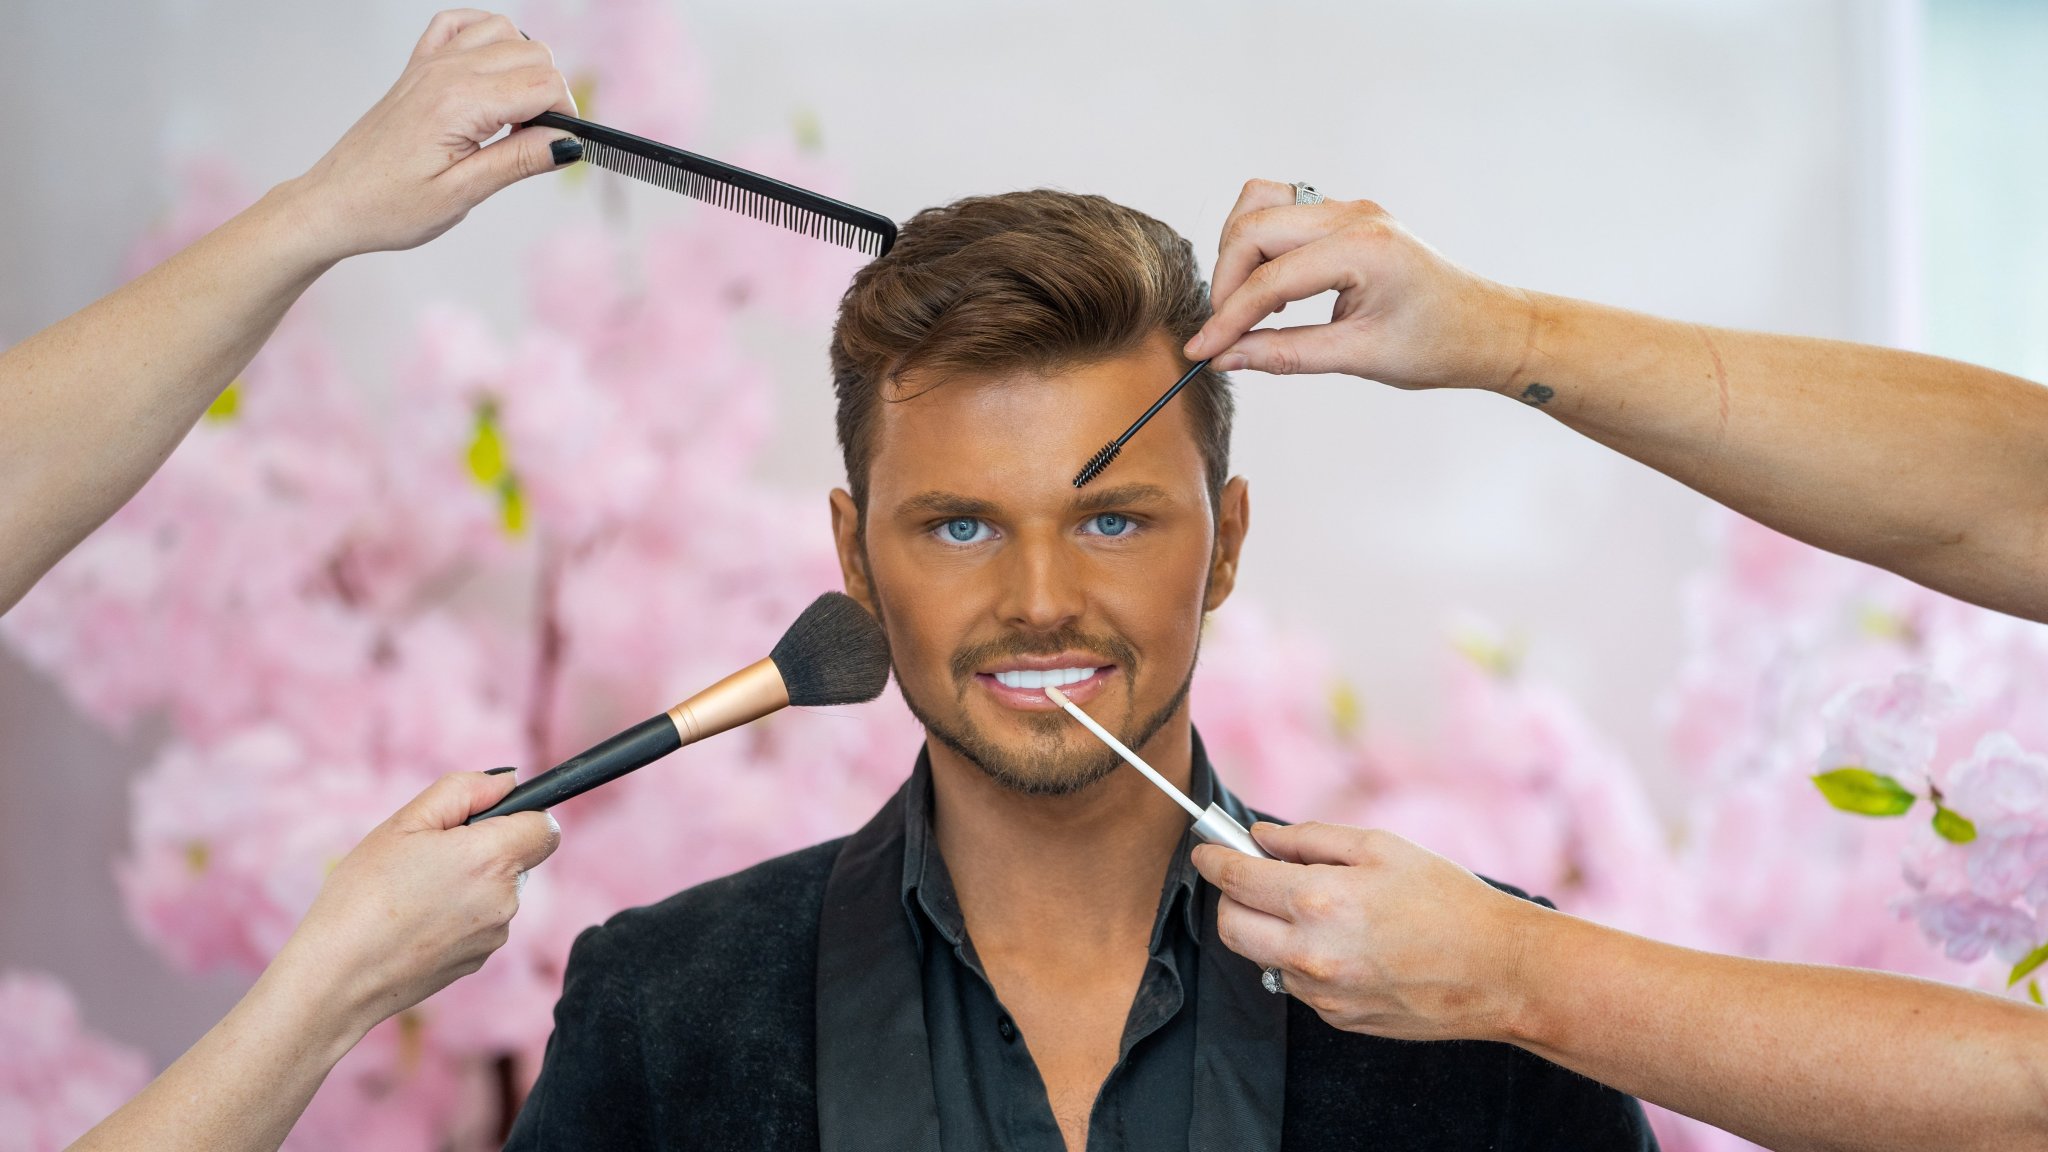 Human 'Ken' doll spent $14,000 on plastic surgery in just one year